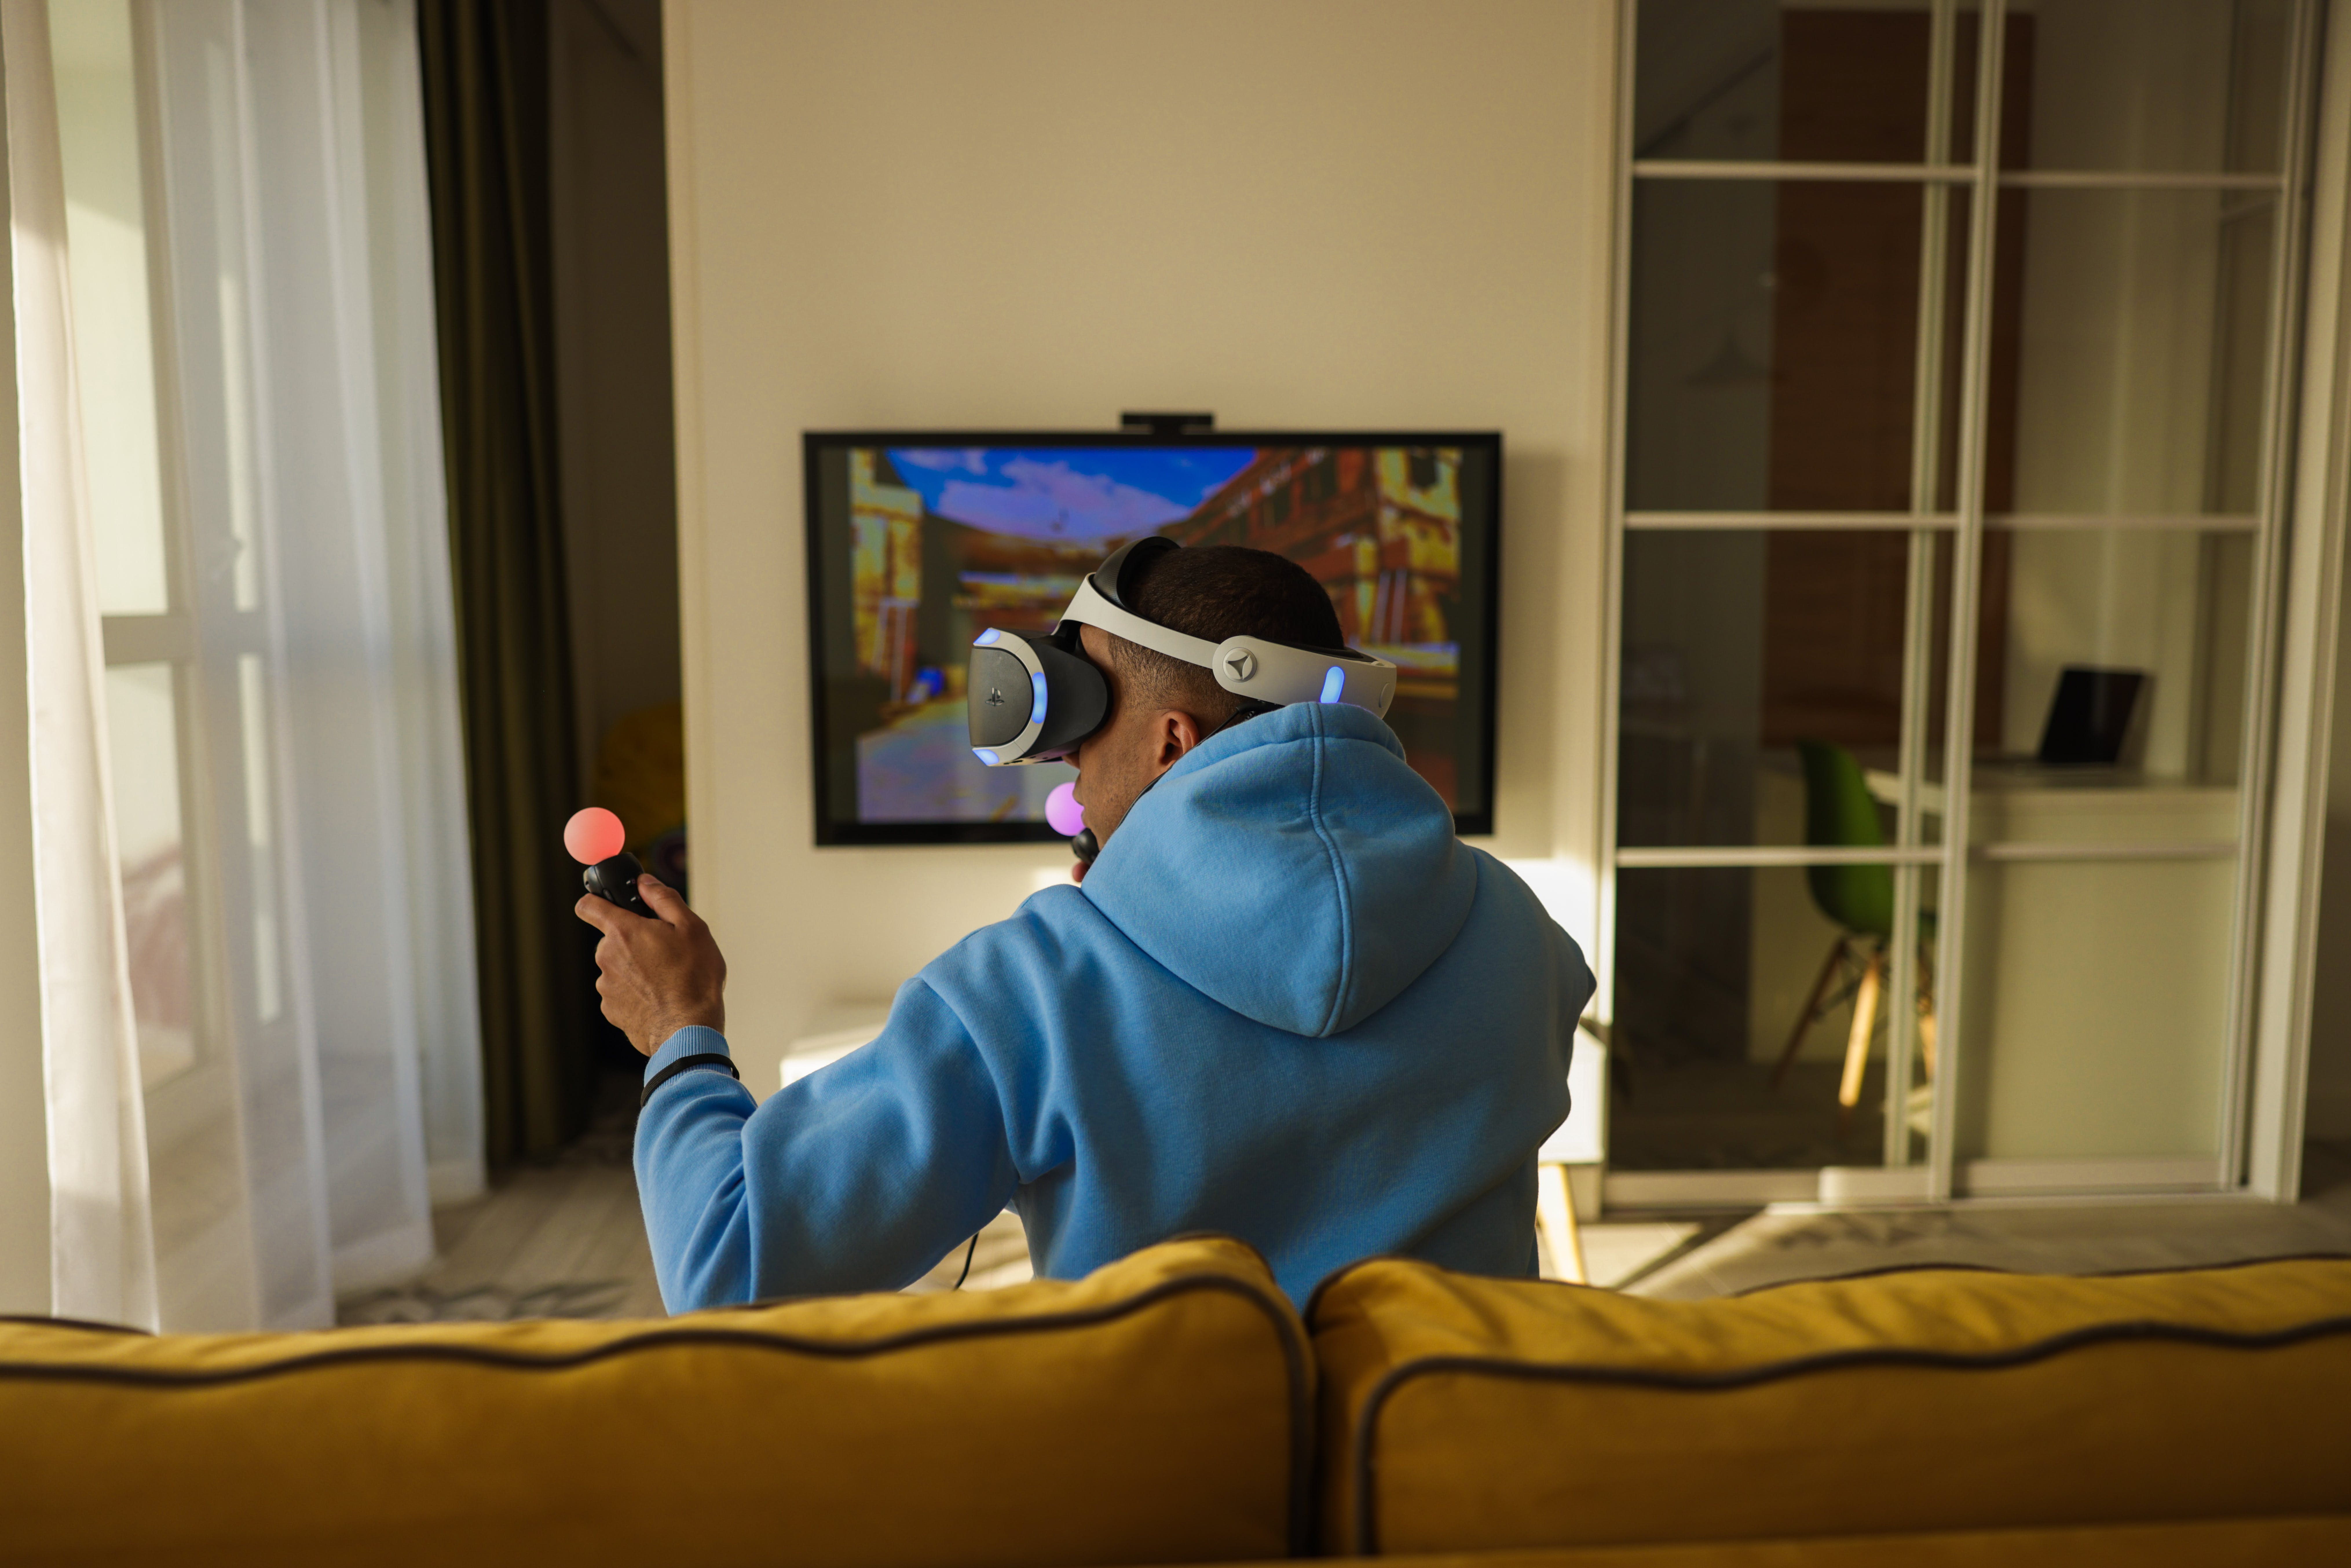 photo of man playing with VR headset